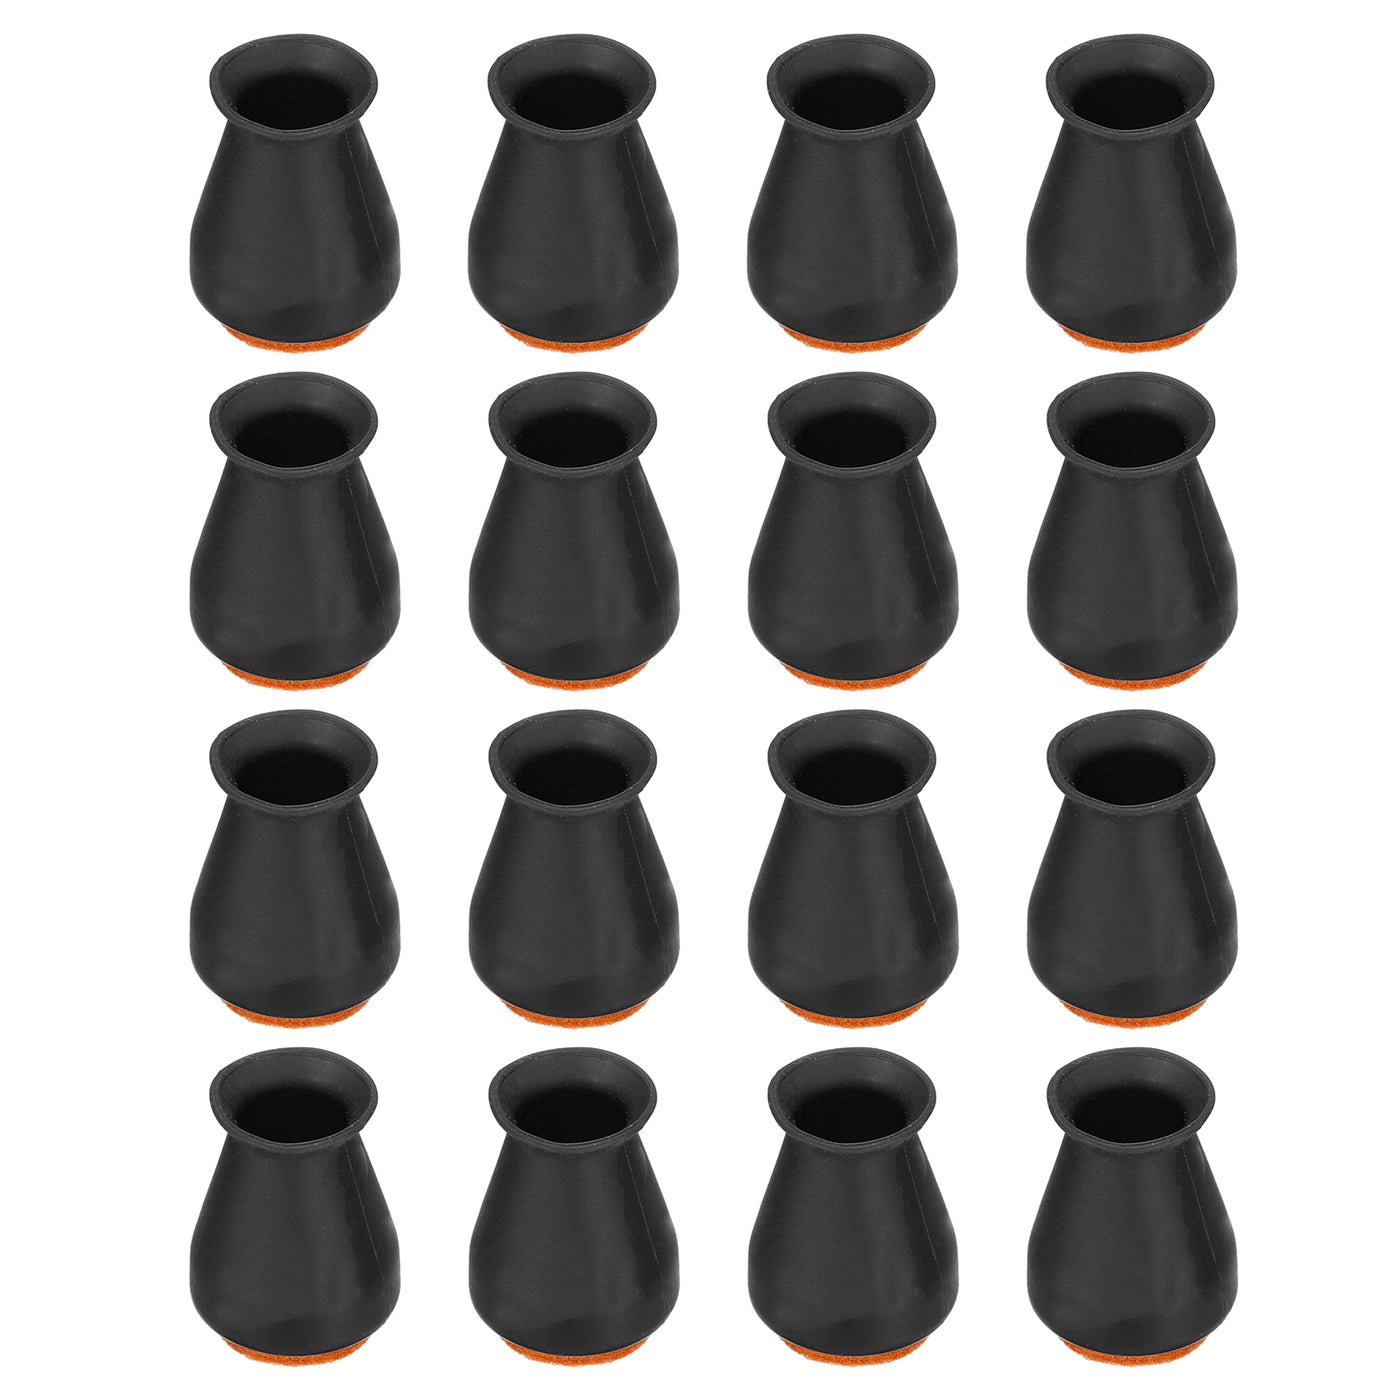 uxcell Uxcell Chair Leg Floor Protectors, 16Pcs 25mm/ 0.98" Silicone & Felt Chair Leg Cover Caps for Hardwood Floors (Black)